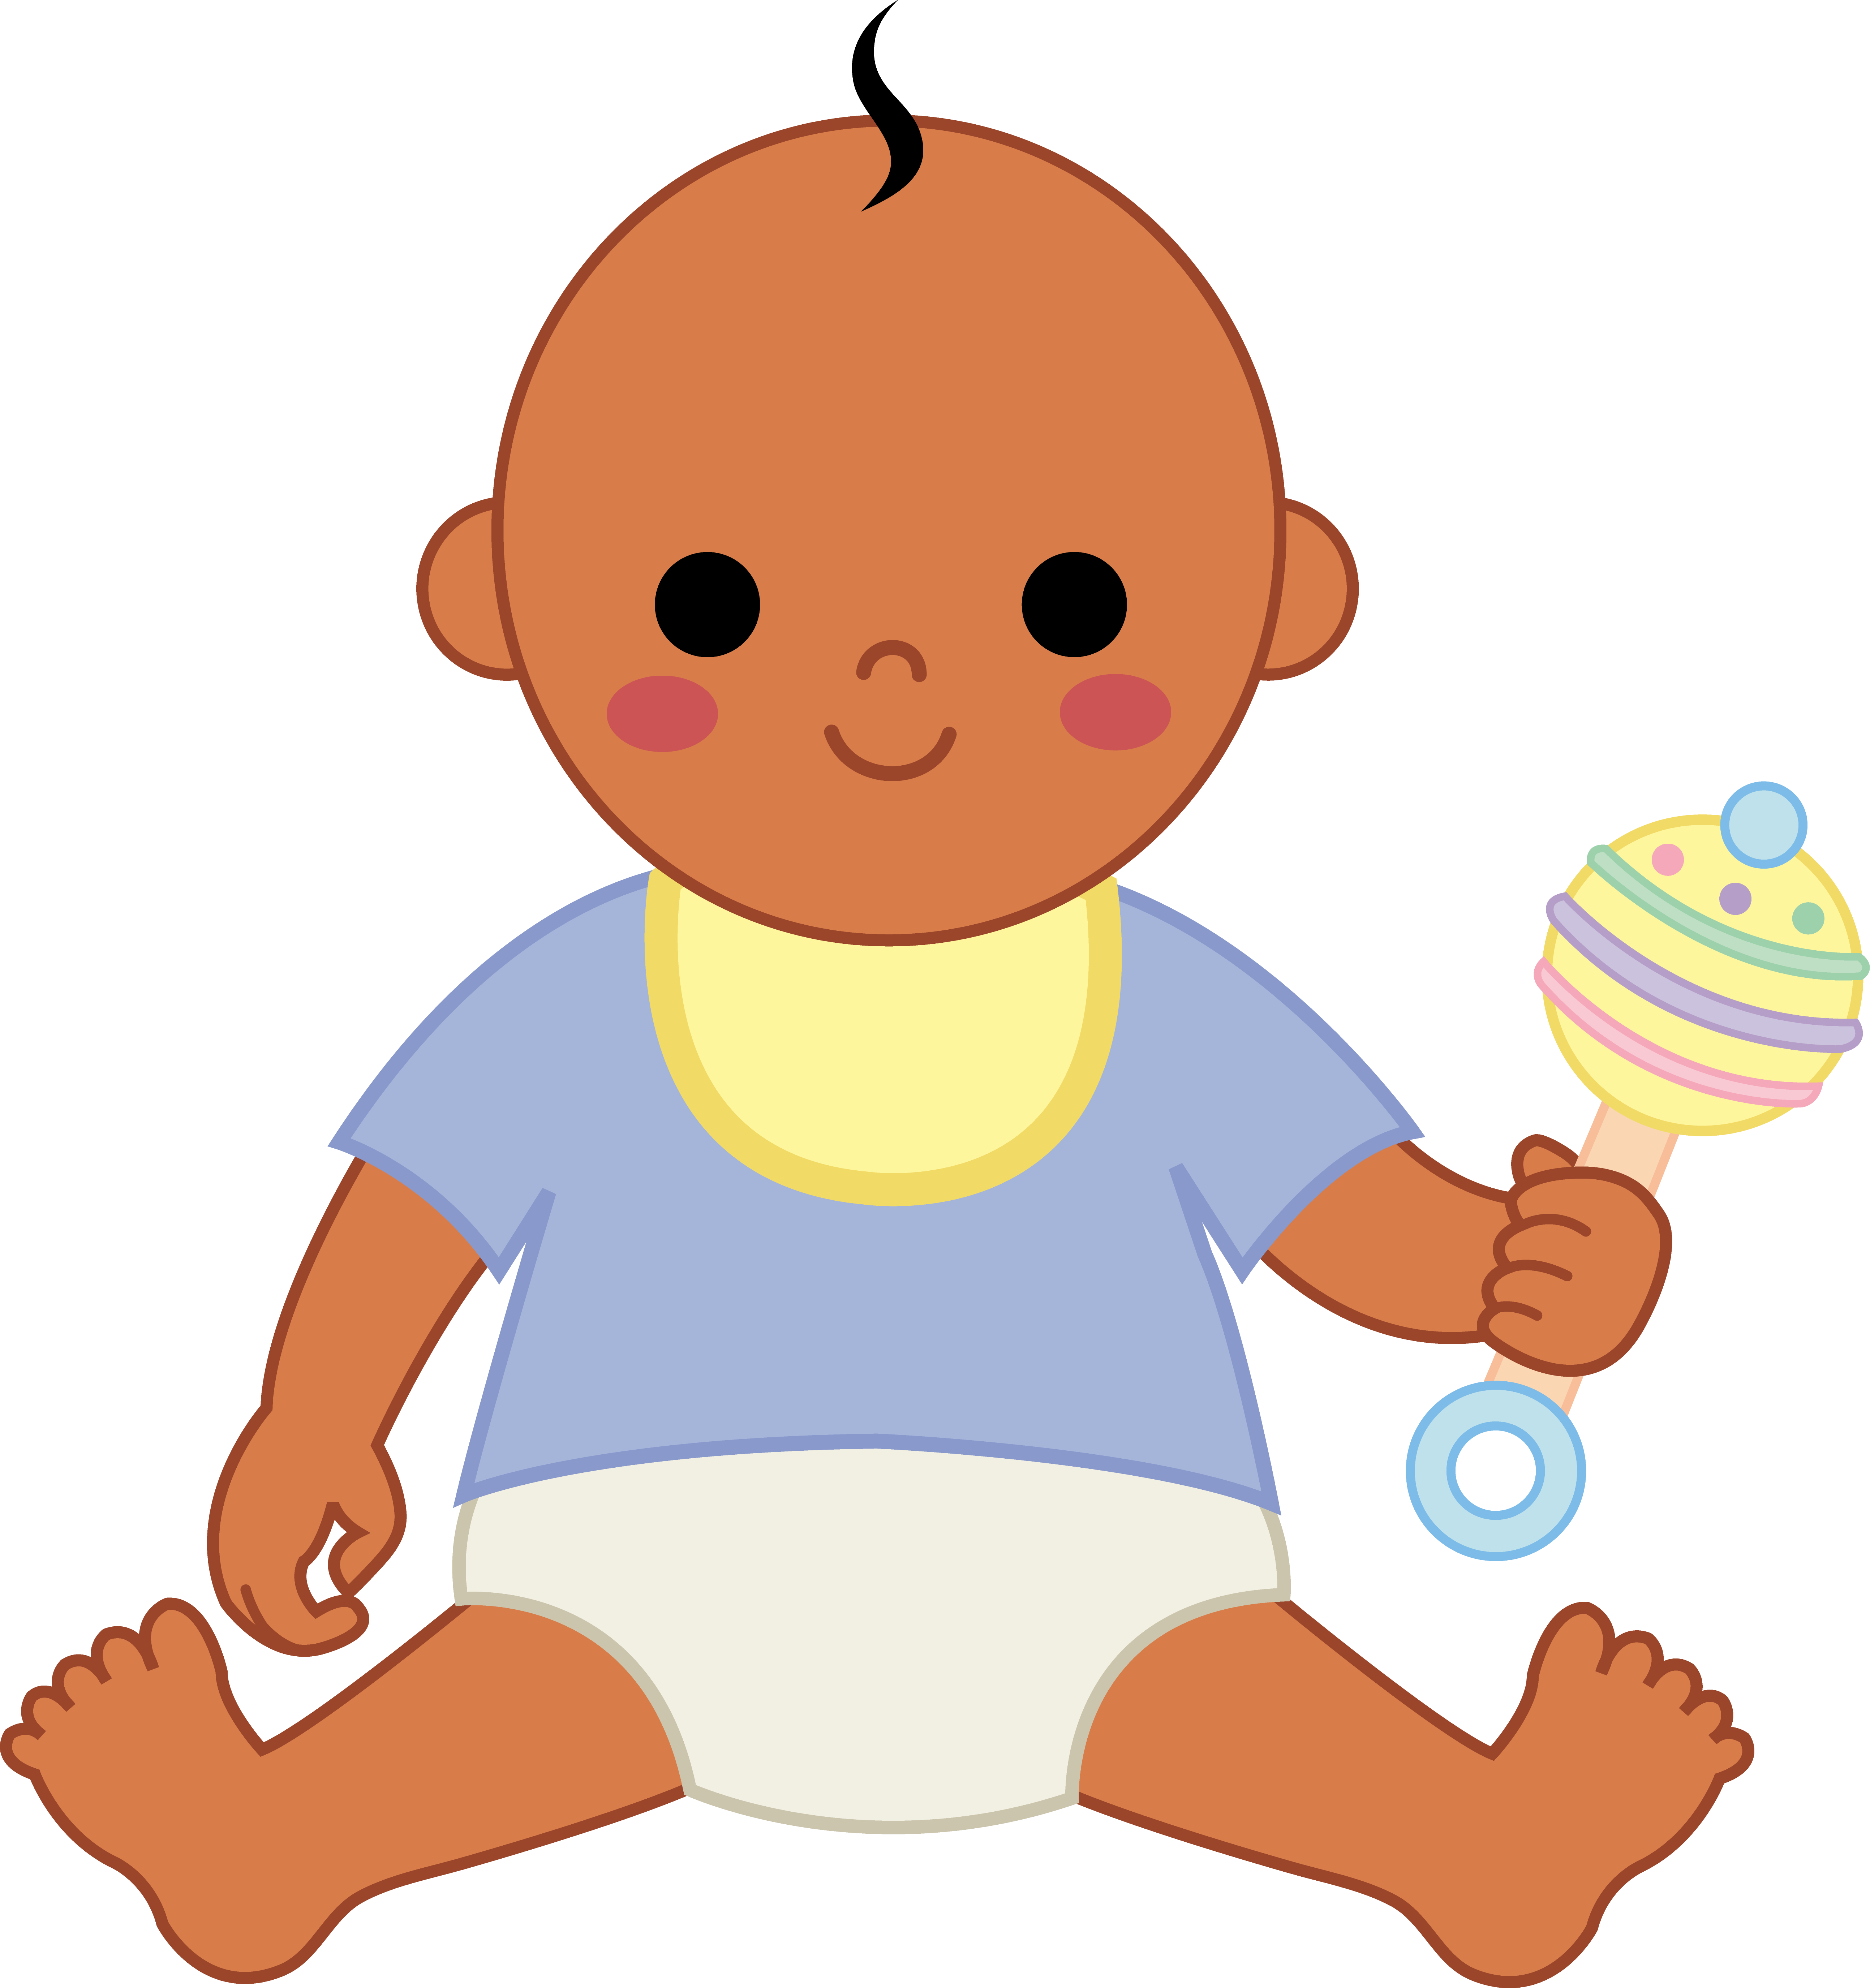 Baby Png - ClipArt Best